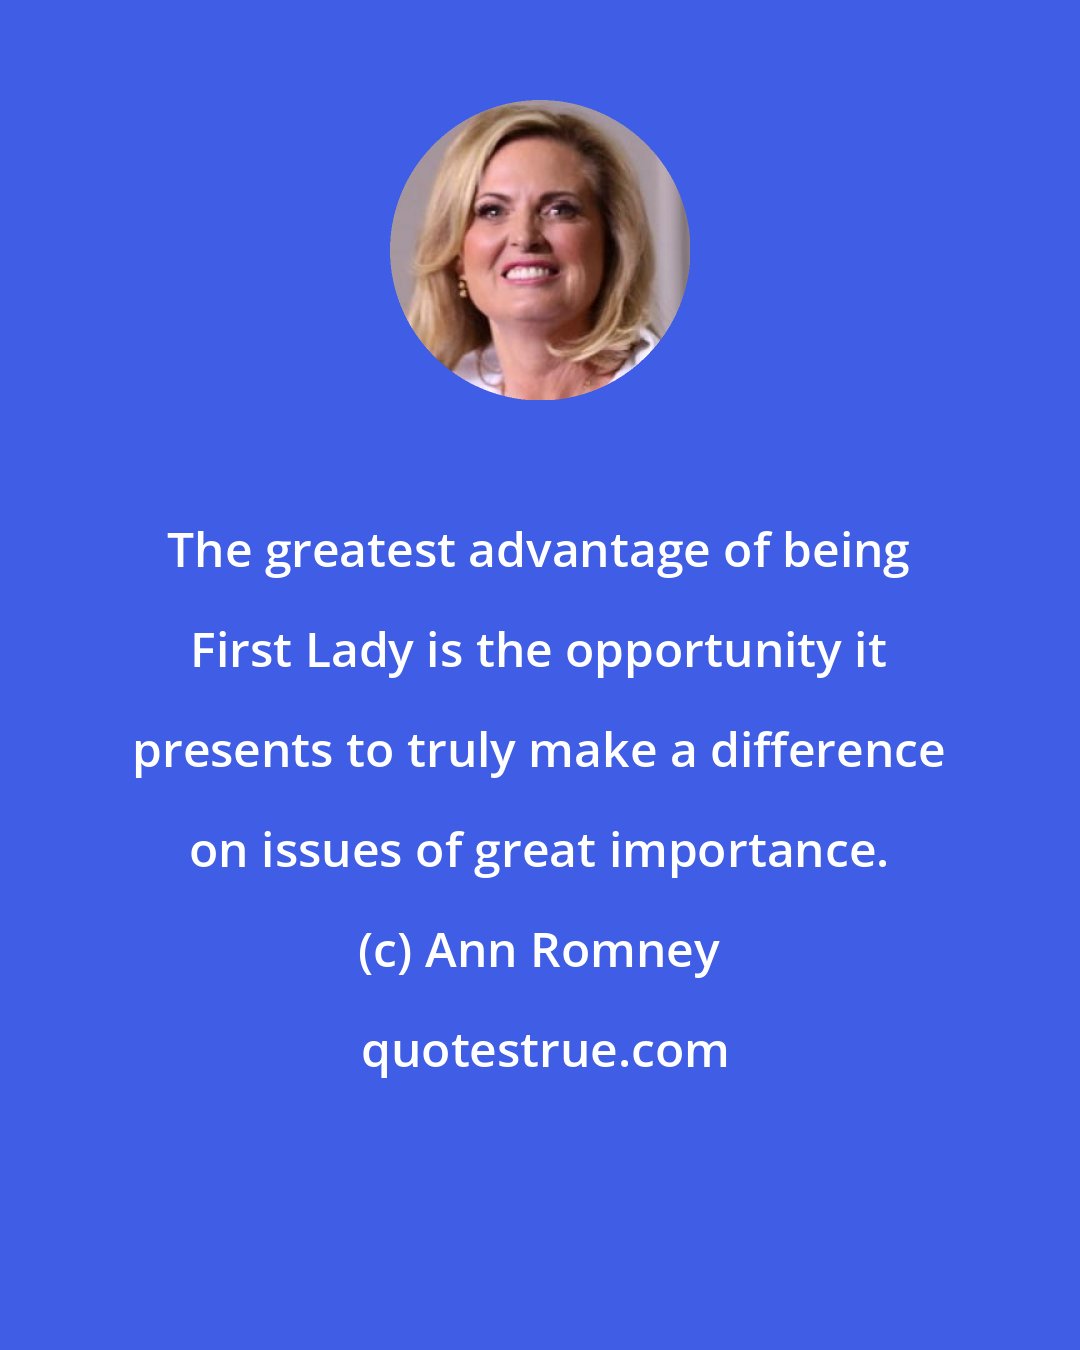 Ann Romney: The greatest advantage of being First Lady is the opportunity it presents to truly make a difference on issues of great importance.